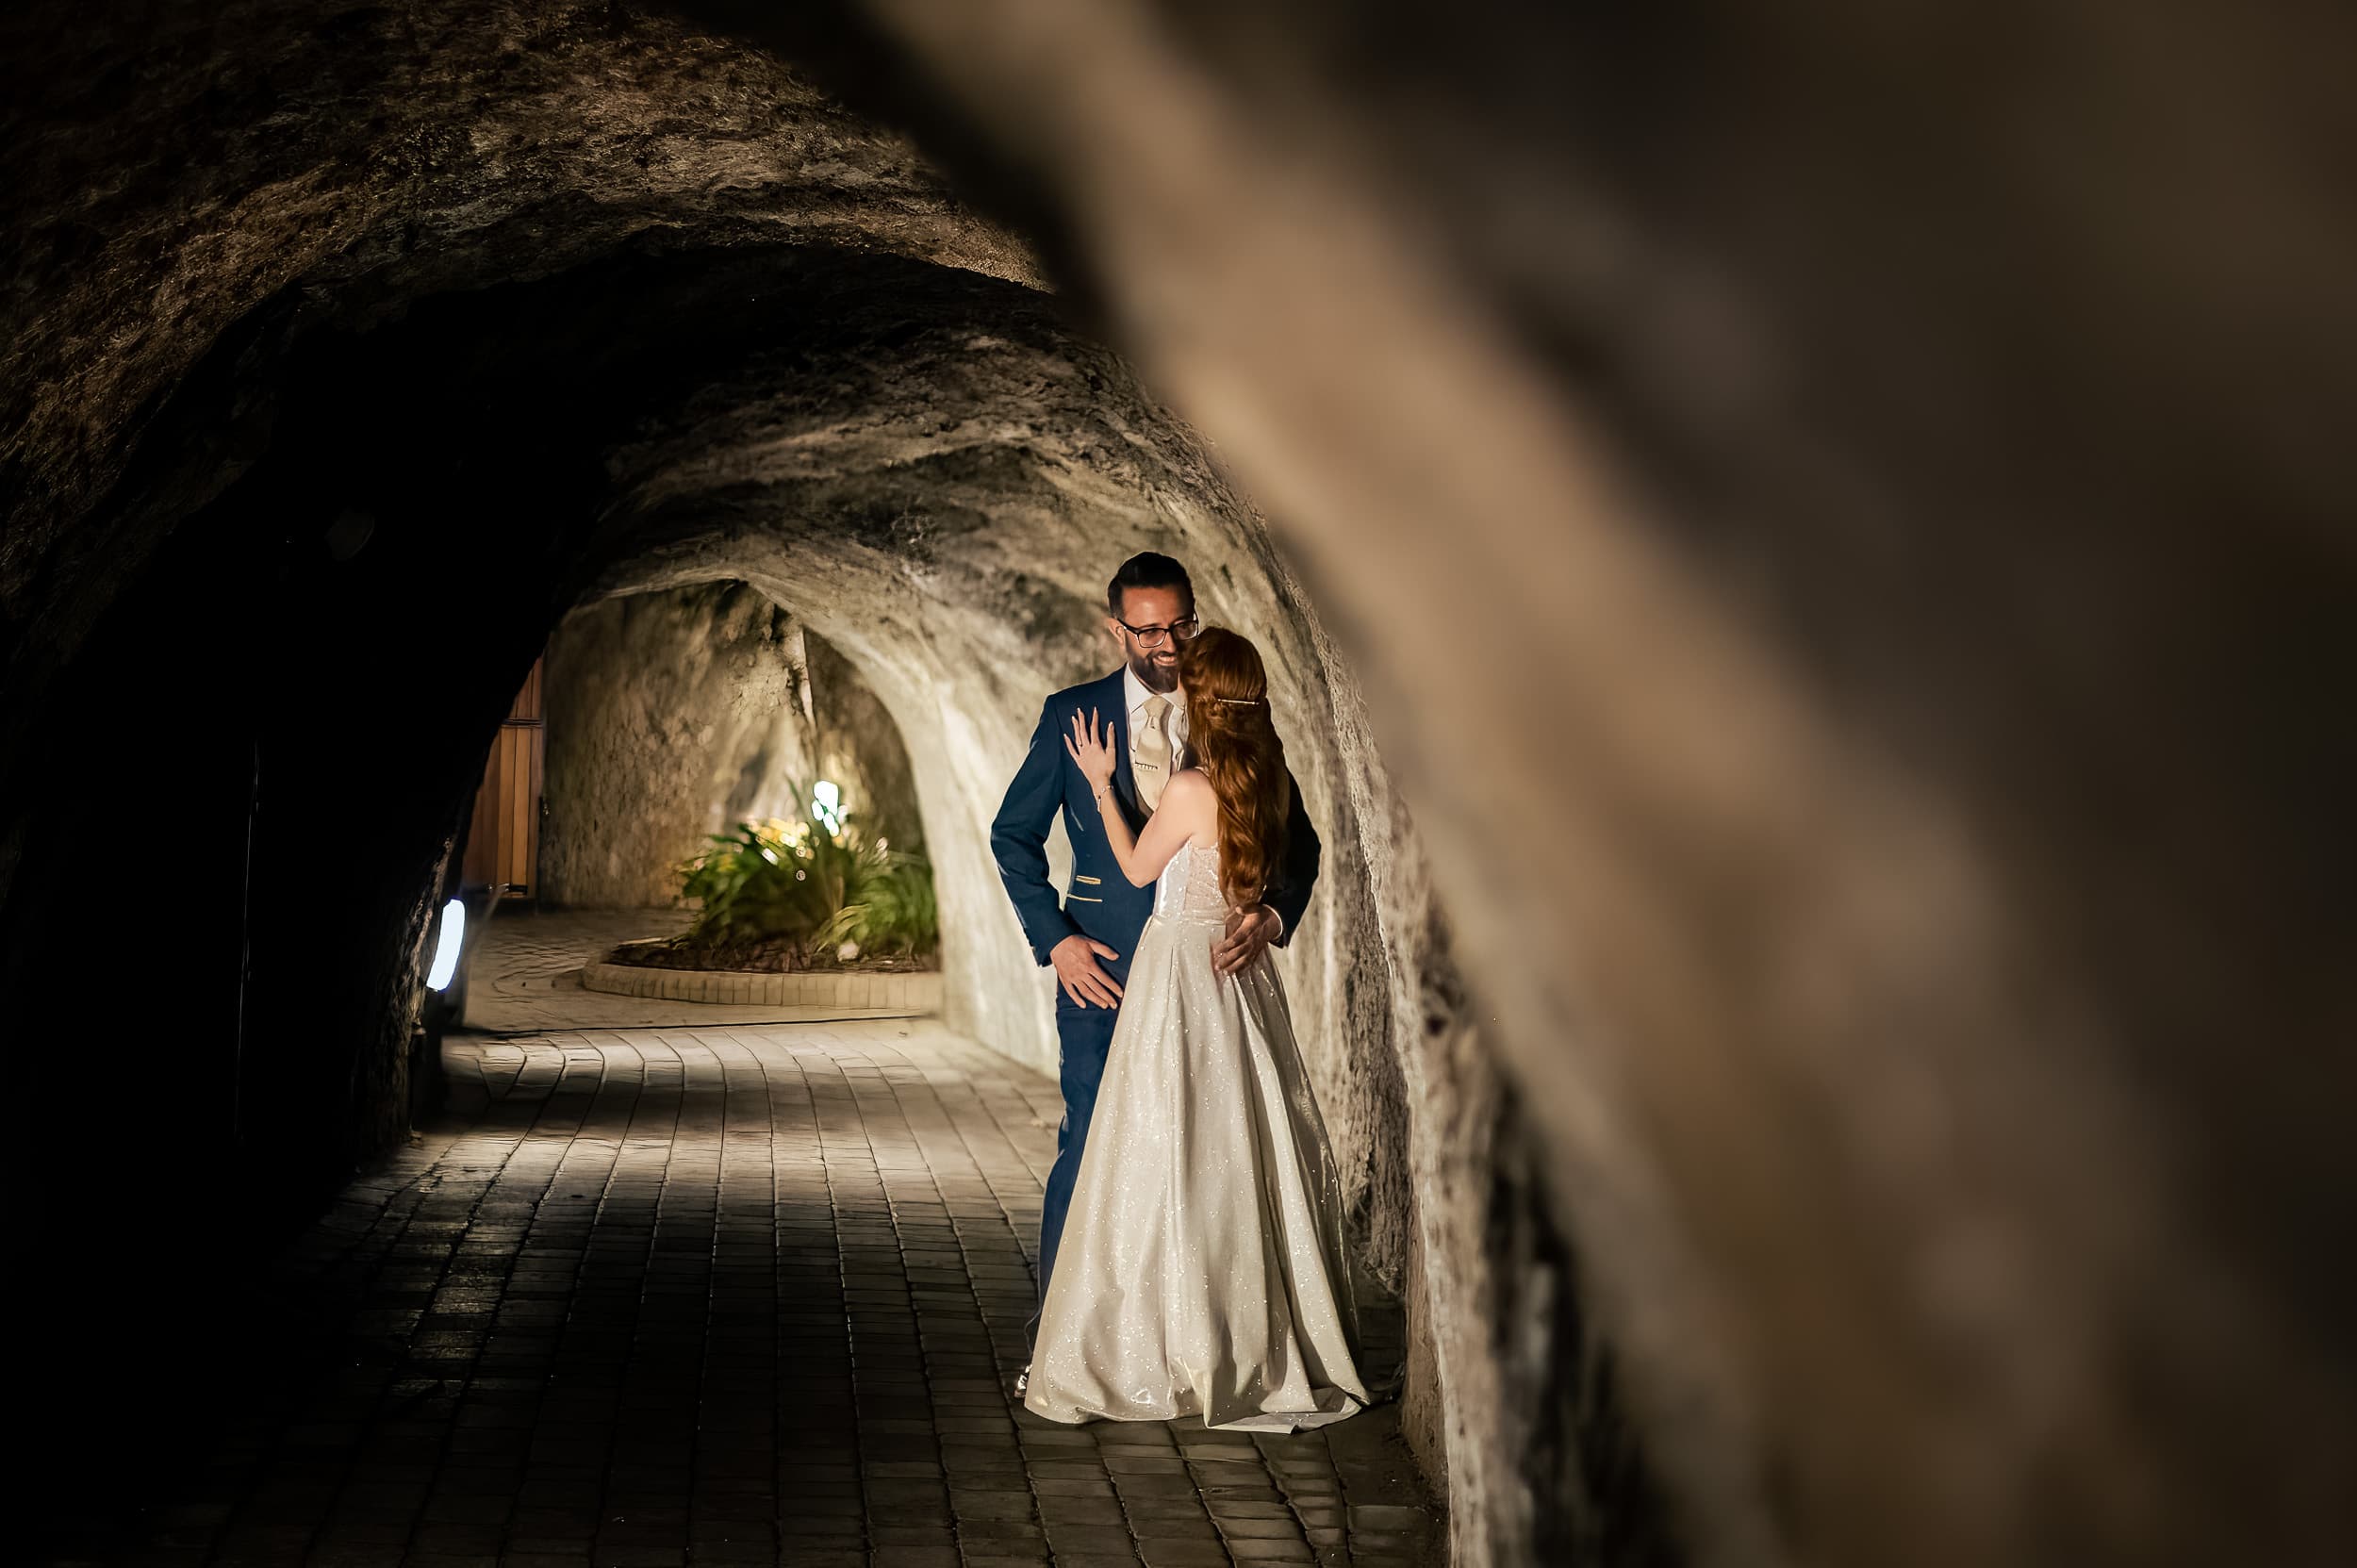 Bride and groom in the tunnels at Tunnels Beaches Wedding venue